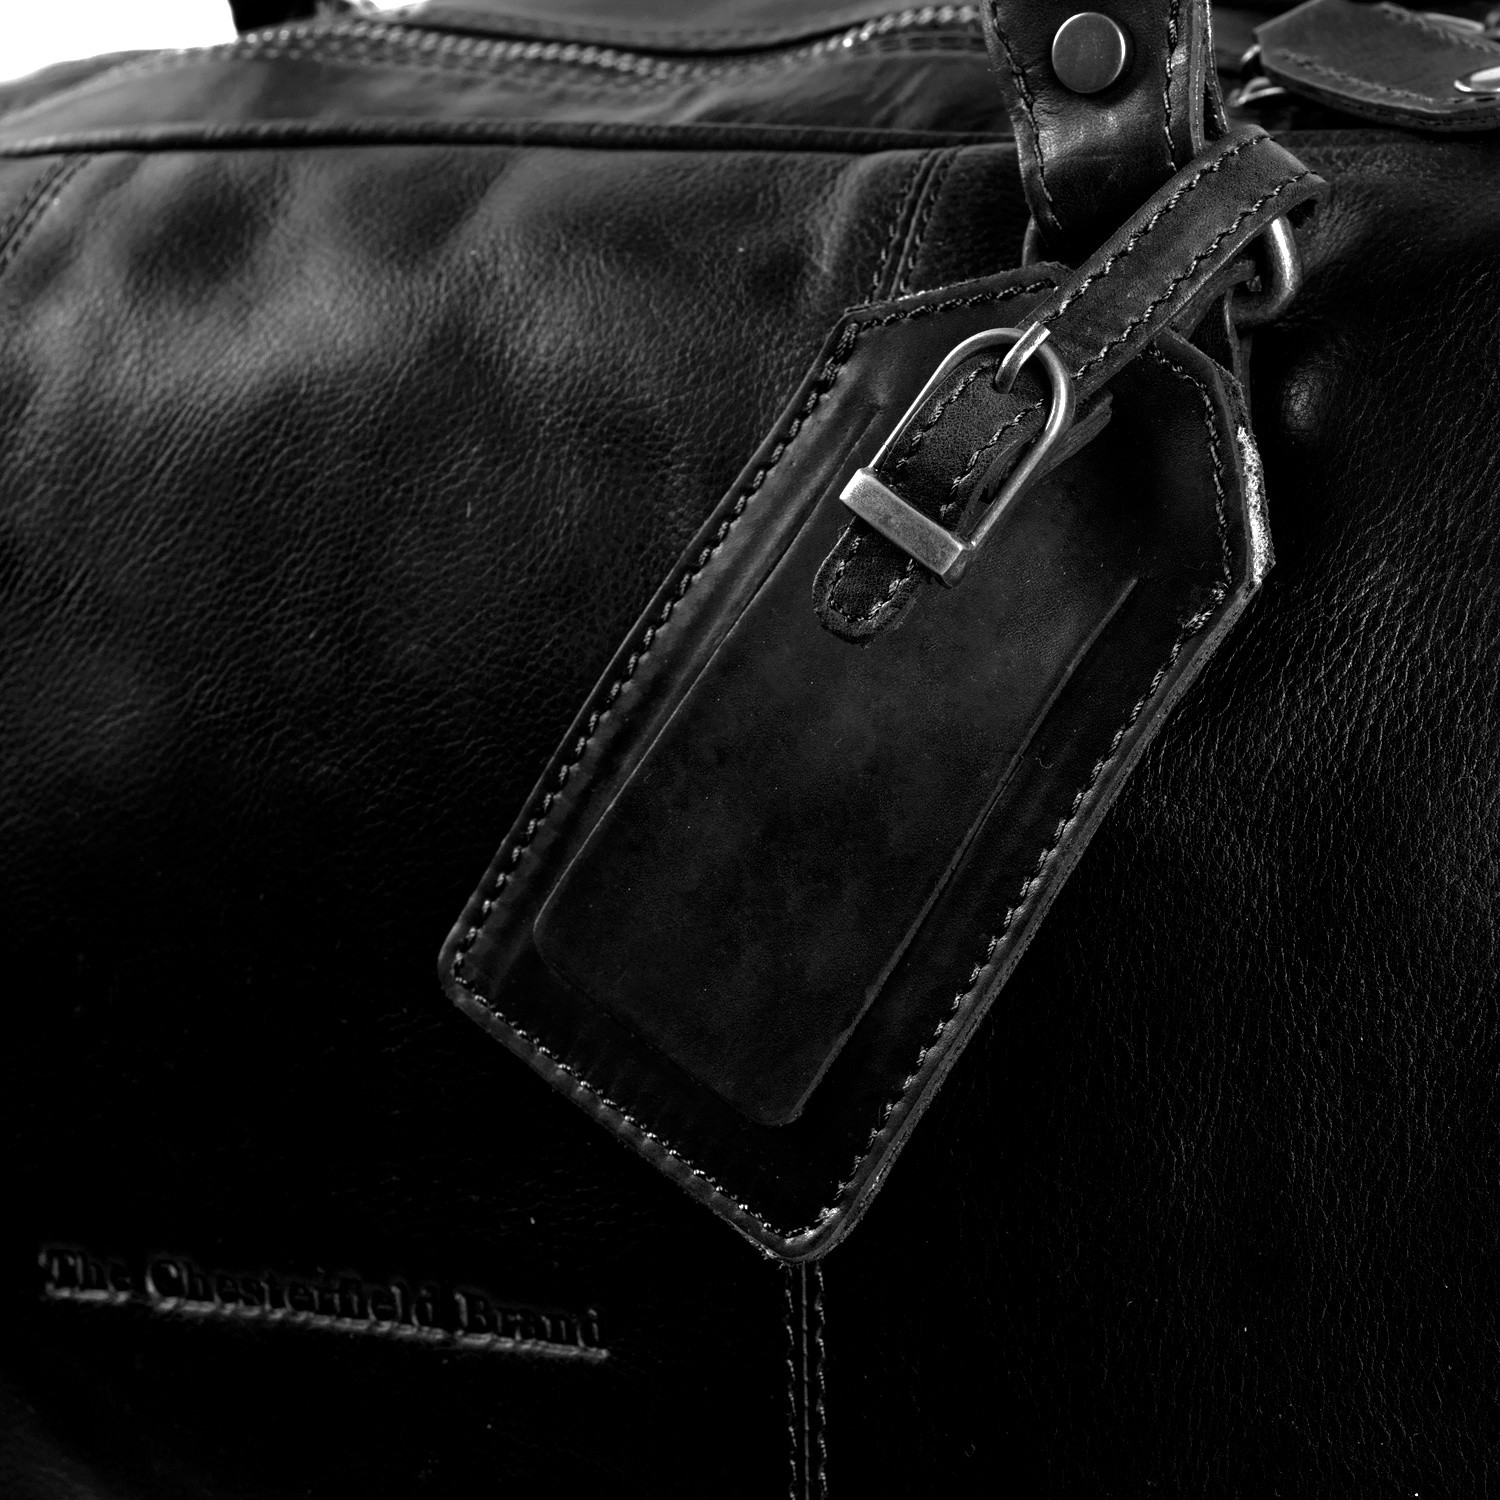 Leather Weekend Bag  Shop The Chesterfield Brand for Weekend Bags - The  Chesterfield Brand